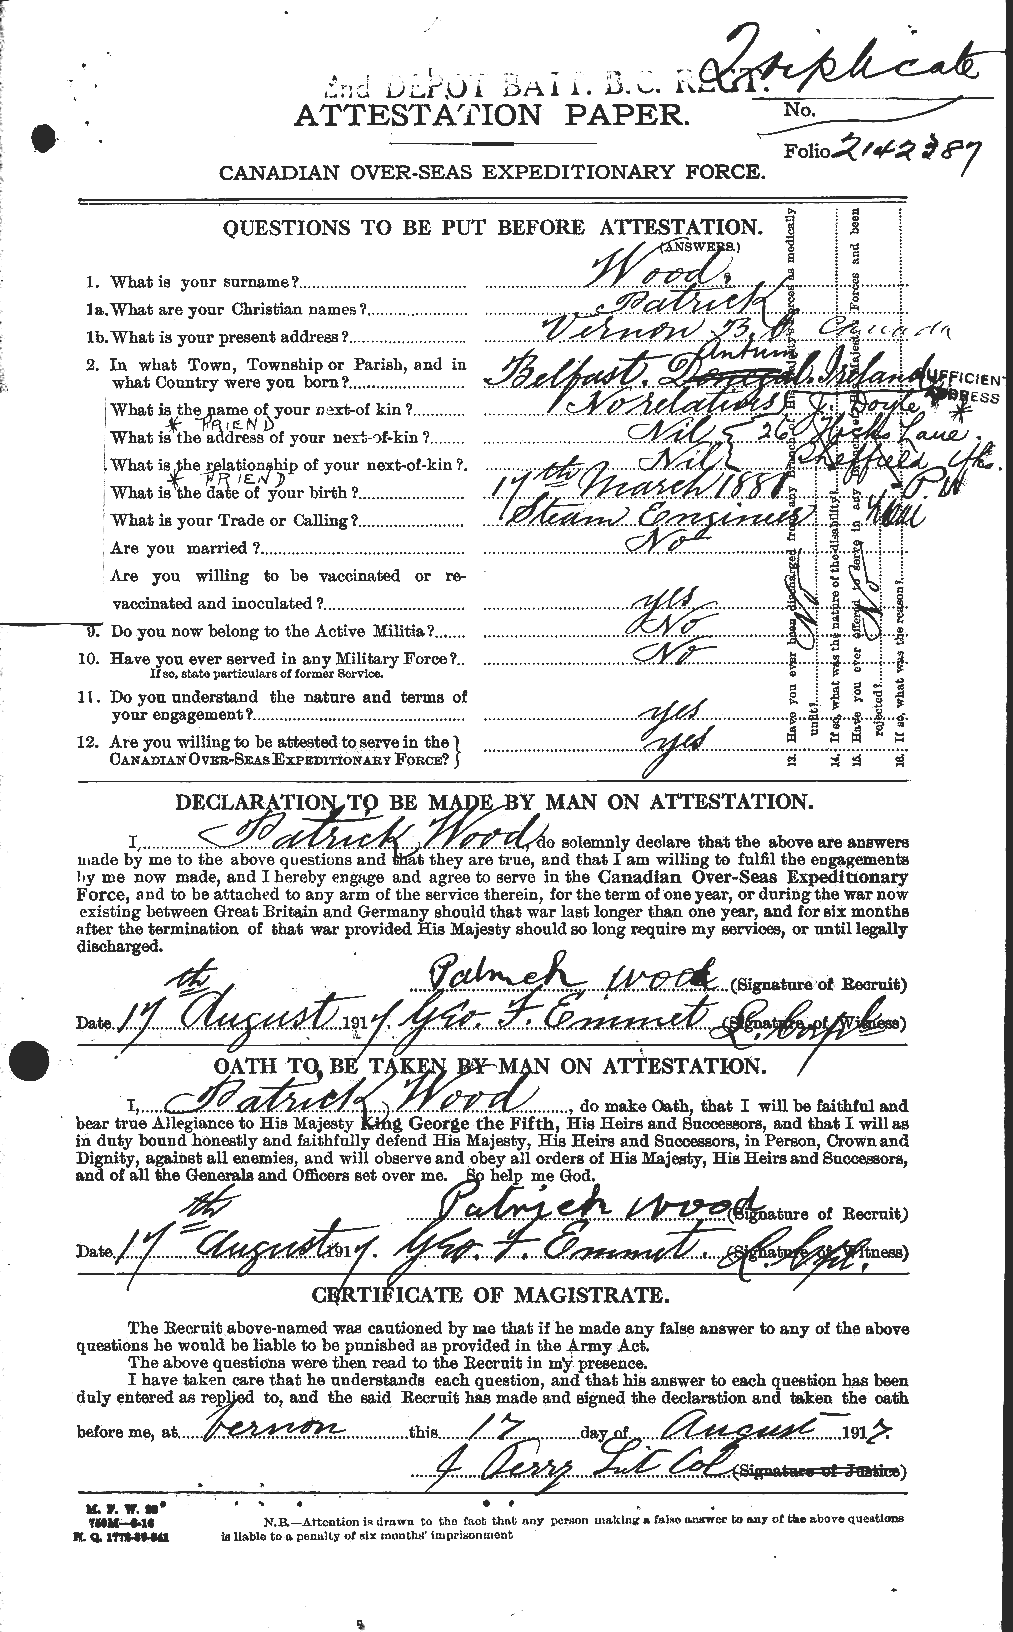 Personnel Records of the First World War - CEF 684710a